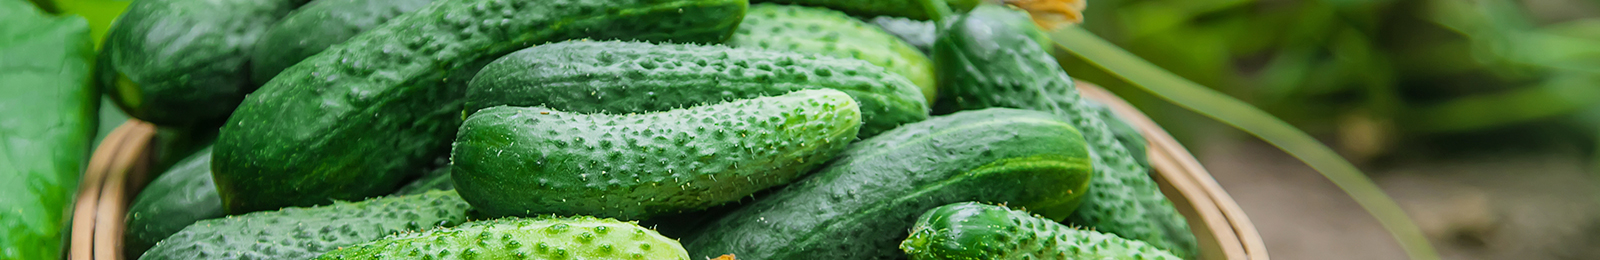 Cucumber: Sow and Grow Guide